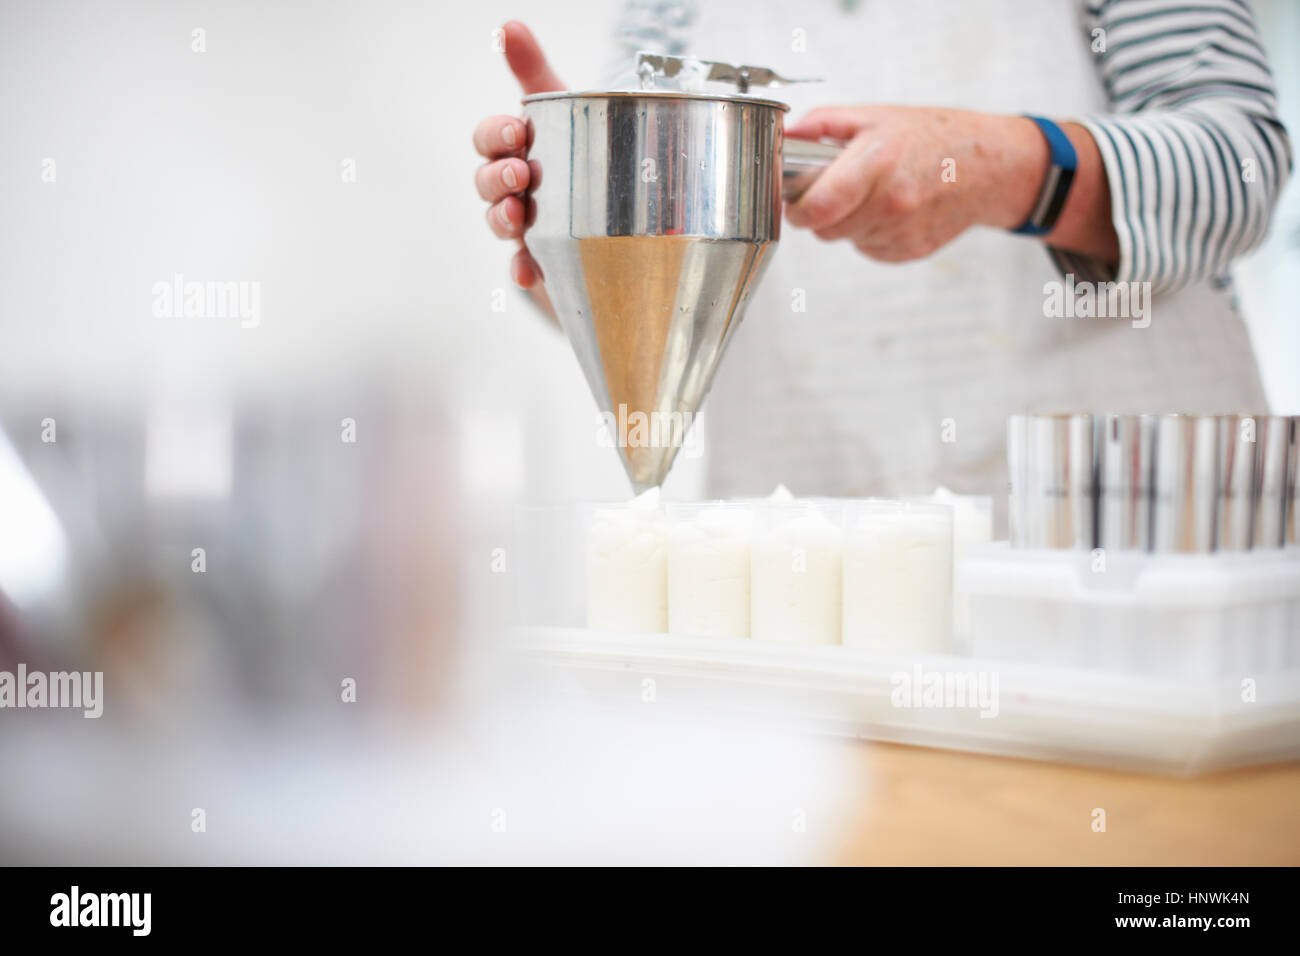 Senior woman in kitchen, using pancake funnel to dispense cream, homemade cosmetics, into pots, mid section Stock Photo